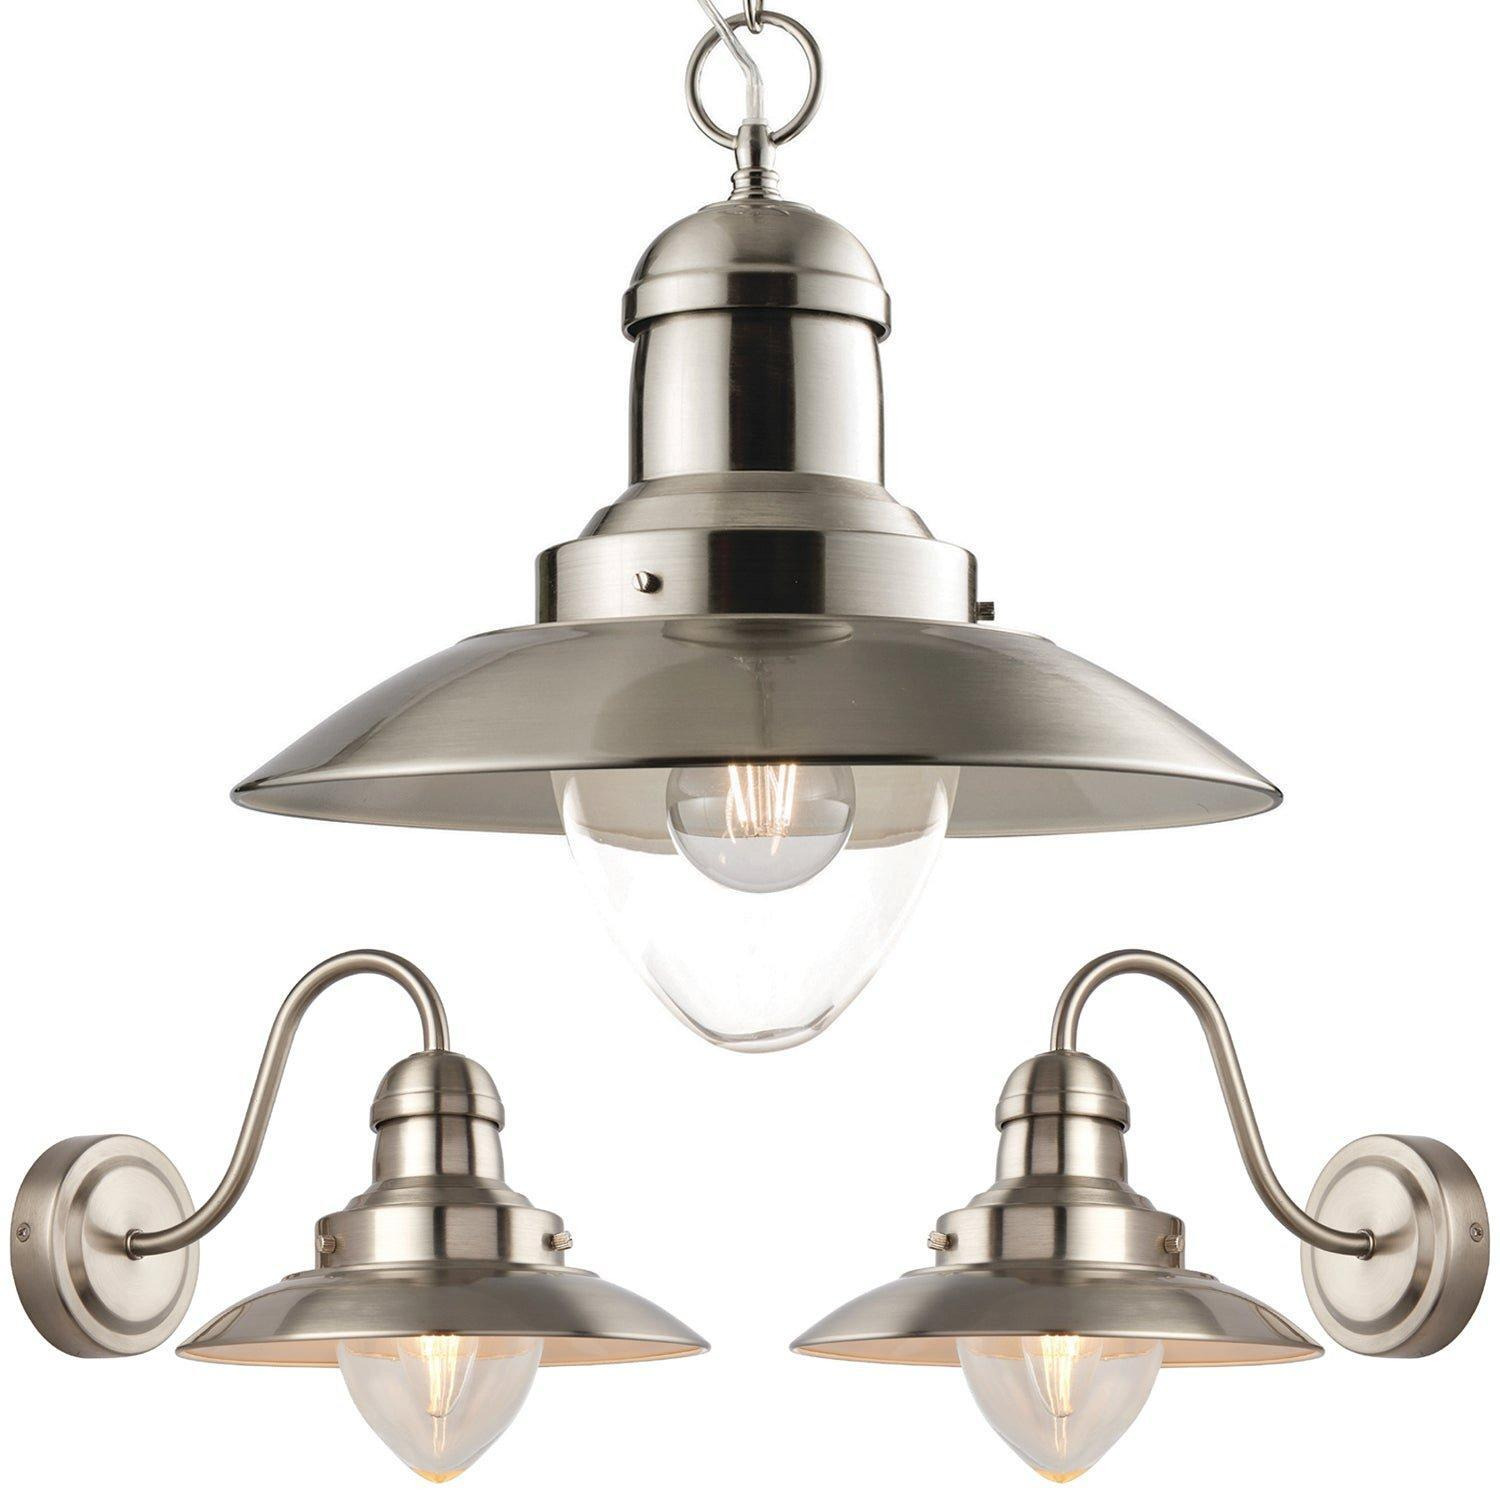 Hanging Ceiling Pendant Lamp & 2x Matching Wall Light Industrial Satin Nickel - image 1